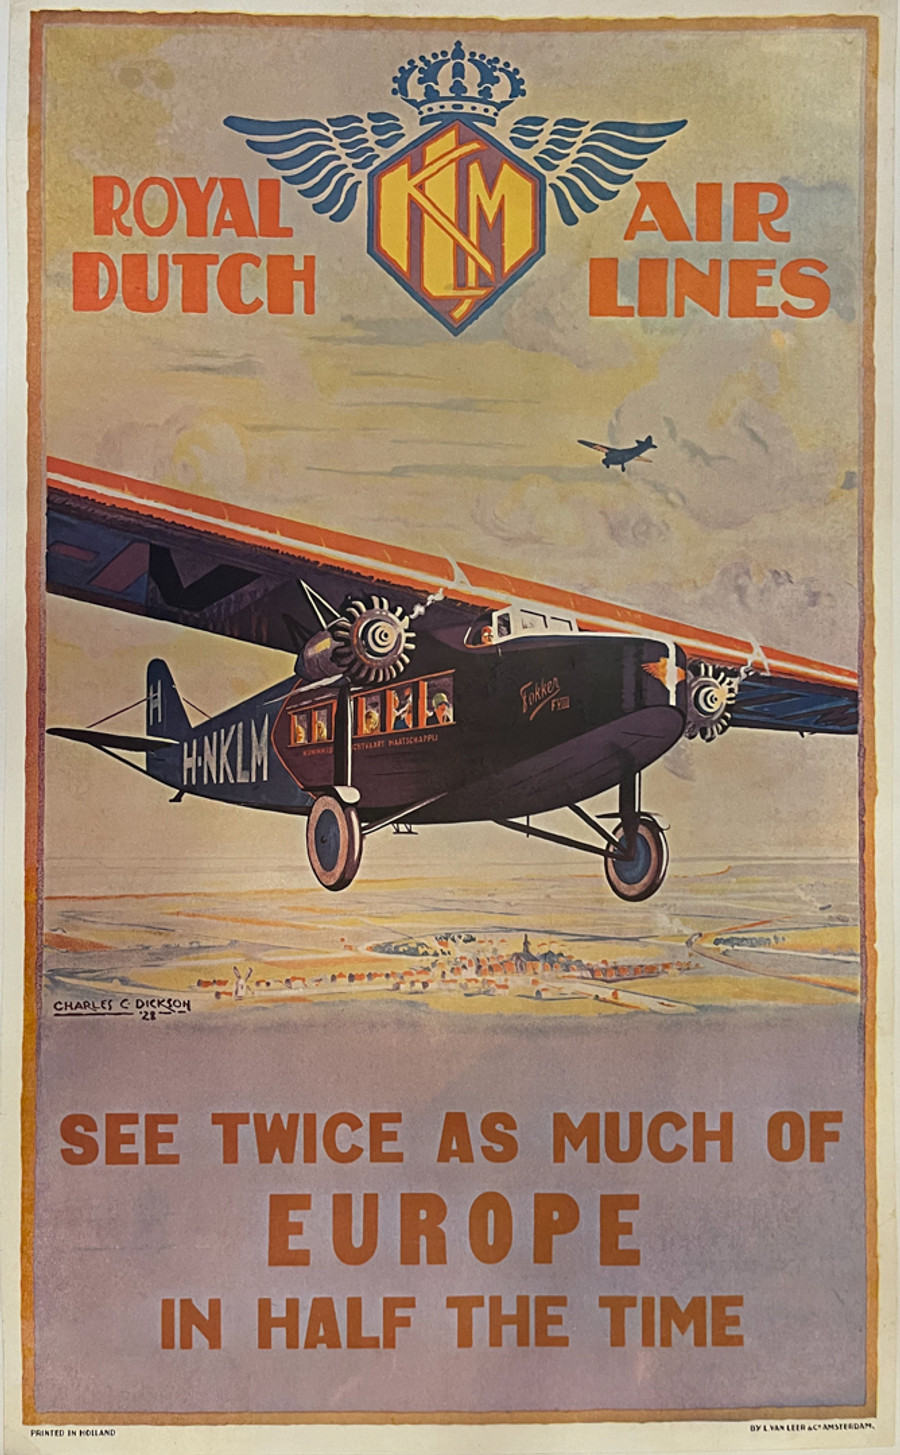 KLM-Royal Dutch Airlines-See Twice as Much of Europe in Half the Time by Charles Dickson, original vintage advertising poster printed in Holland circa 1962 of an earlier 1928 print. A condition. Mounted on archival linen.